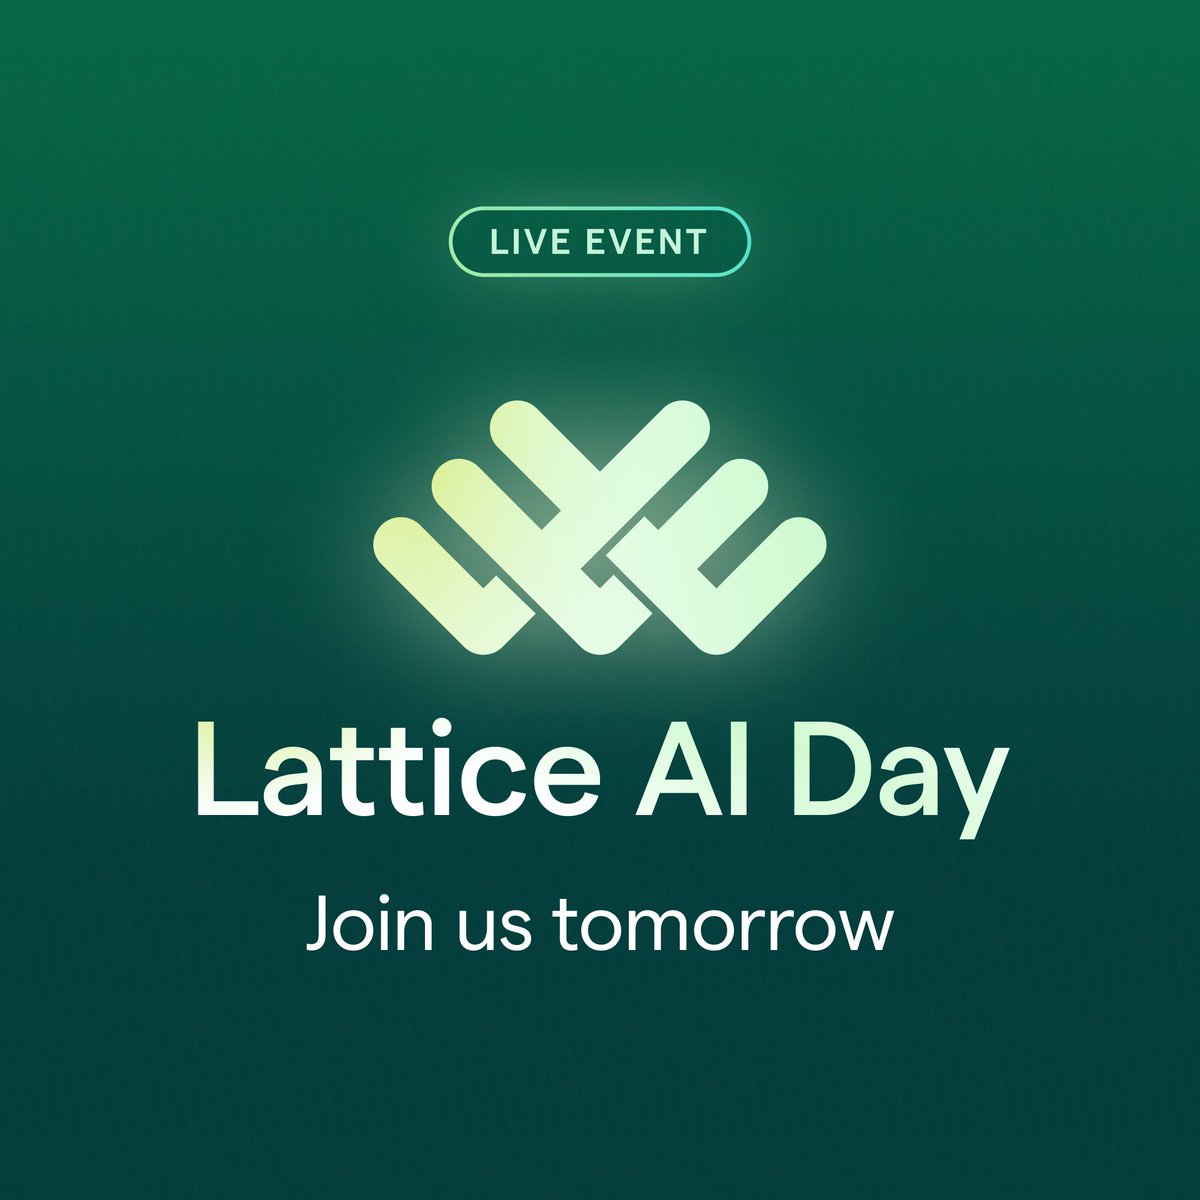 Join Lattice CEO @swbjoyce on #LinkedInLive, March 5, for a first look at Lattice AI: bit.ly/latticeaiday

We’ll share our bold vision for AI, demo new products, and discuss how we plan to reshape the future of work. #BecausePeople